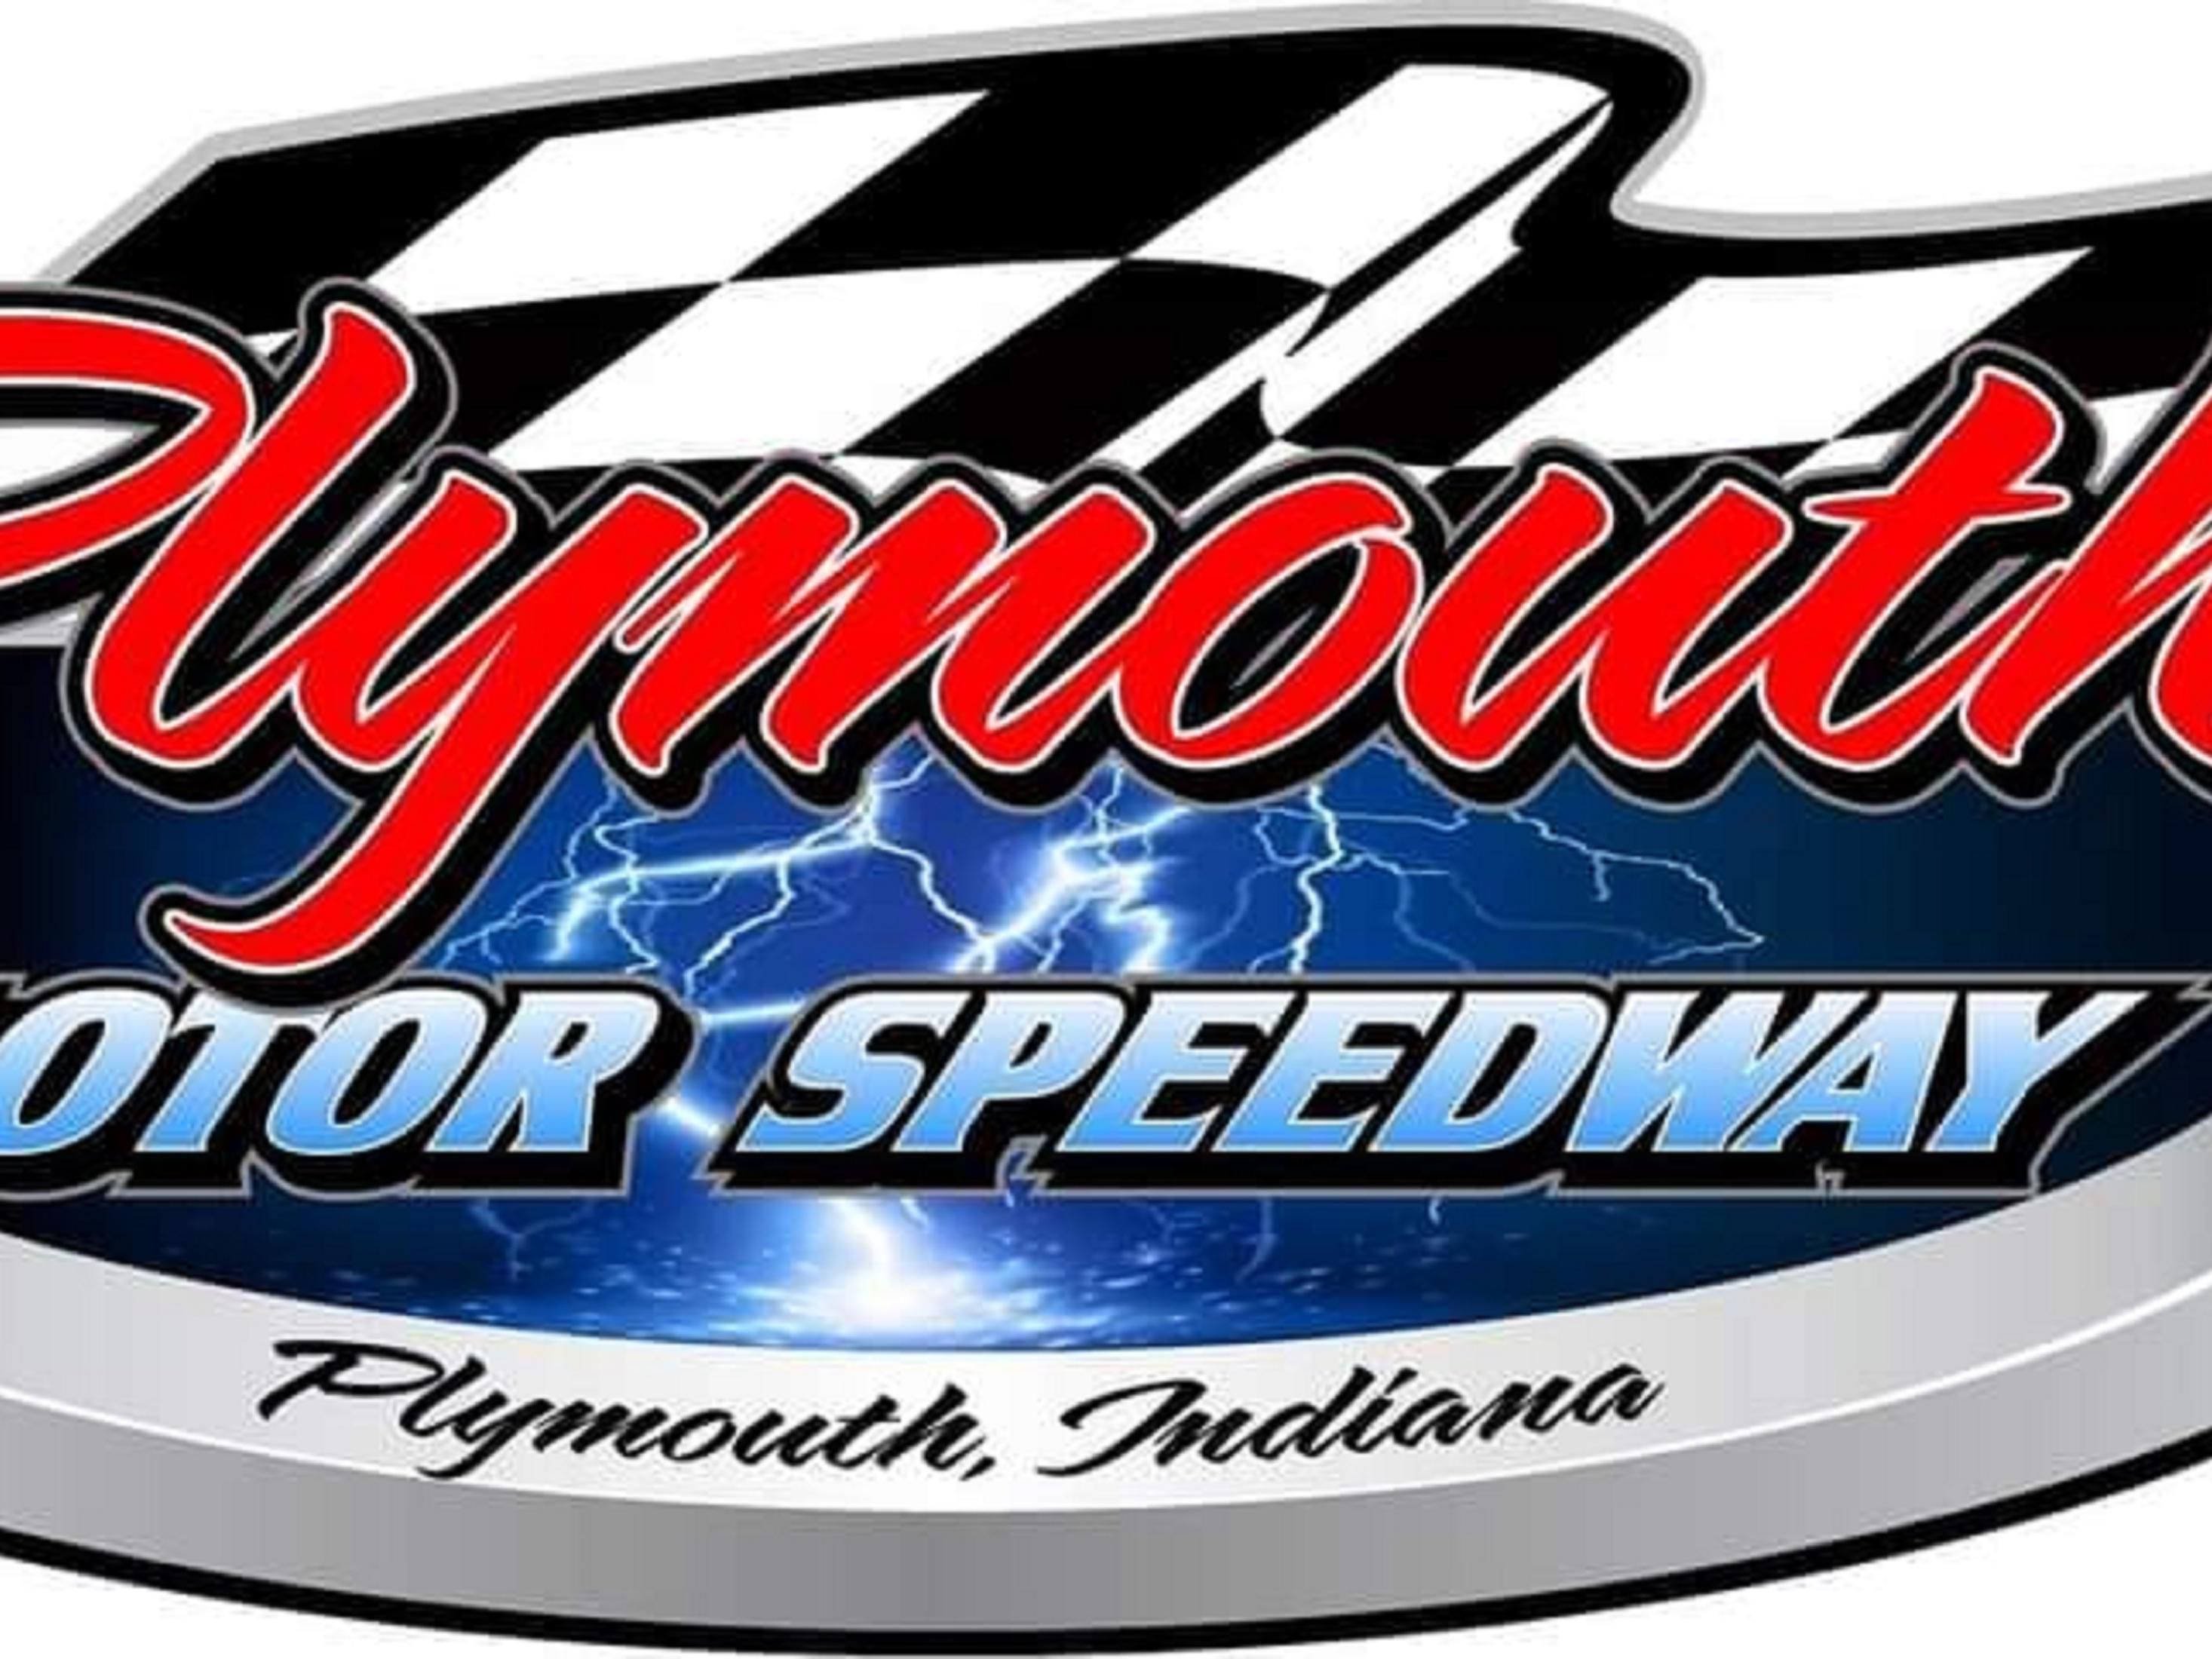 The Plymouth Speedway